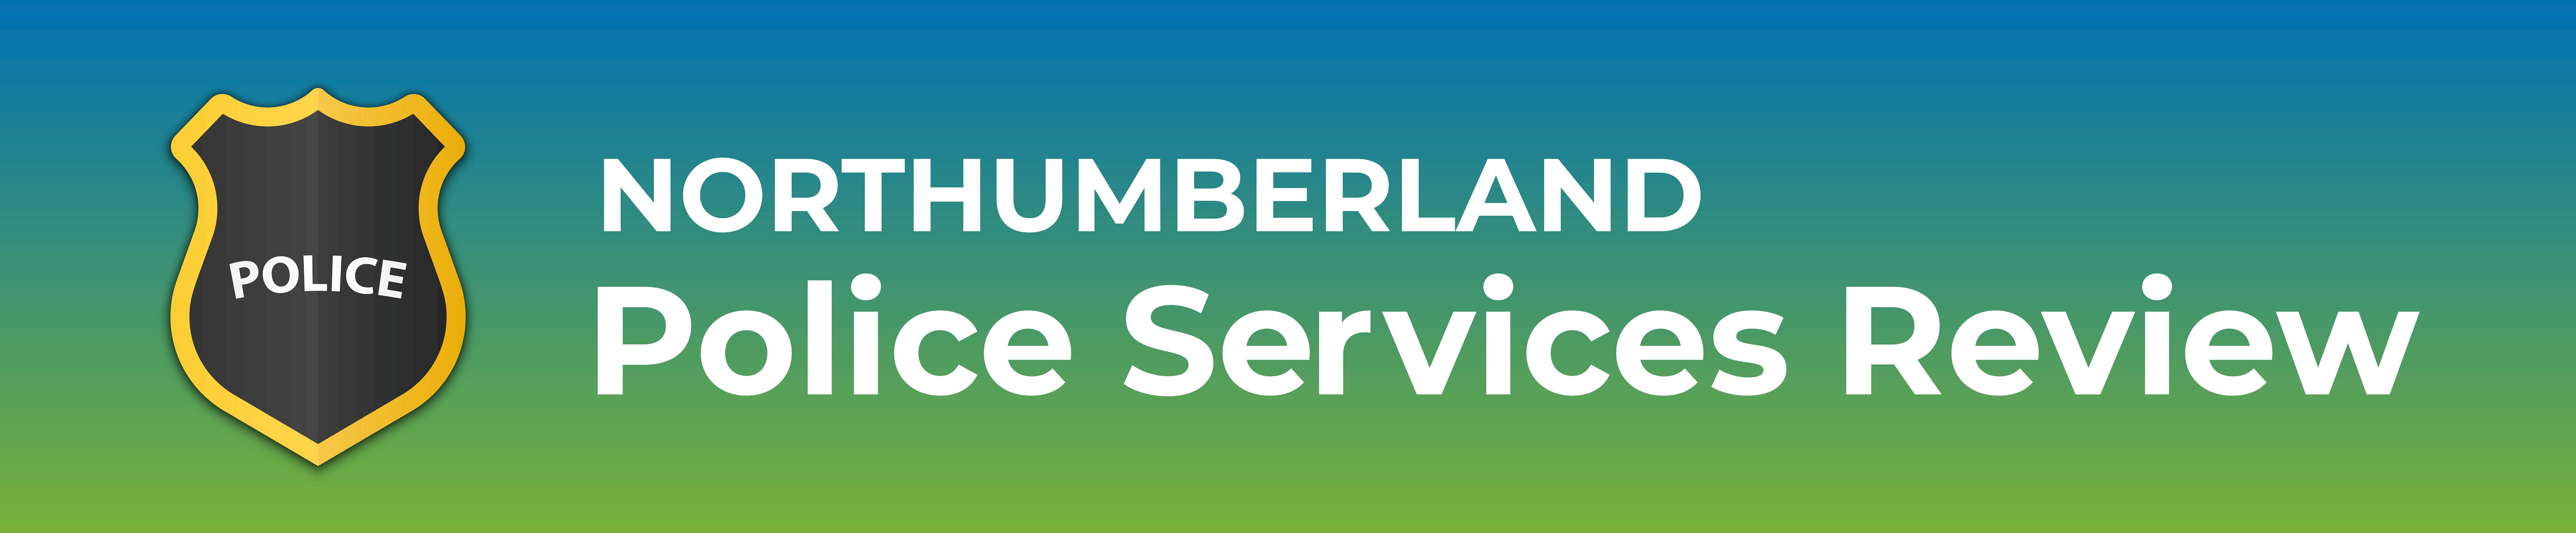 Blue green gradient background and dark grey police badge with yellow outline. Text: Northumberland Police Services Review